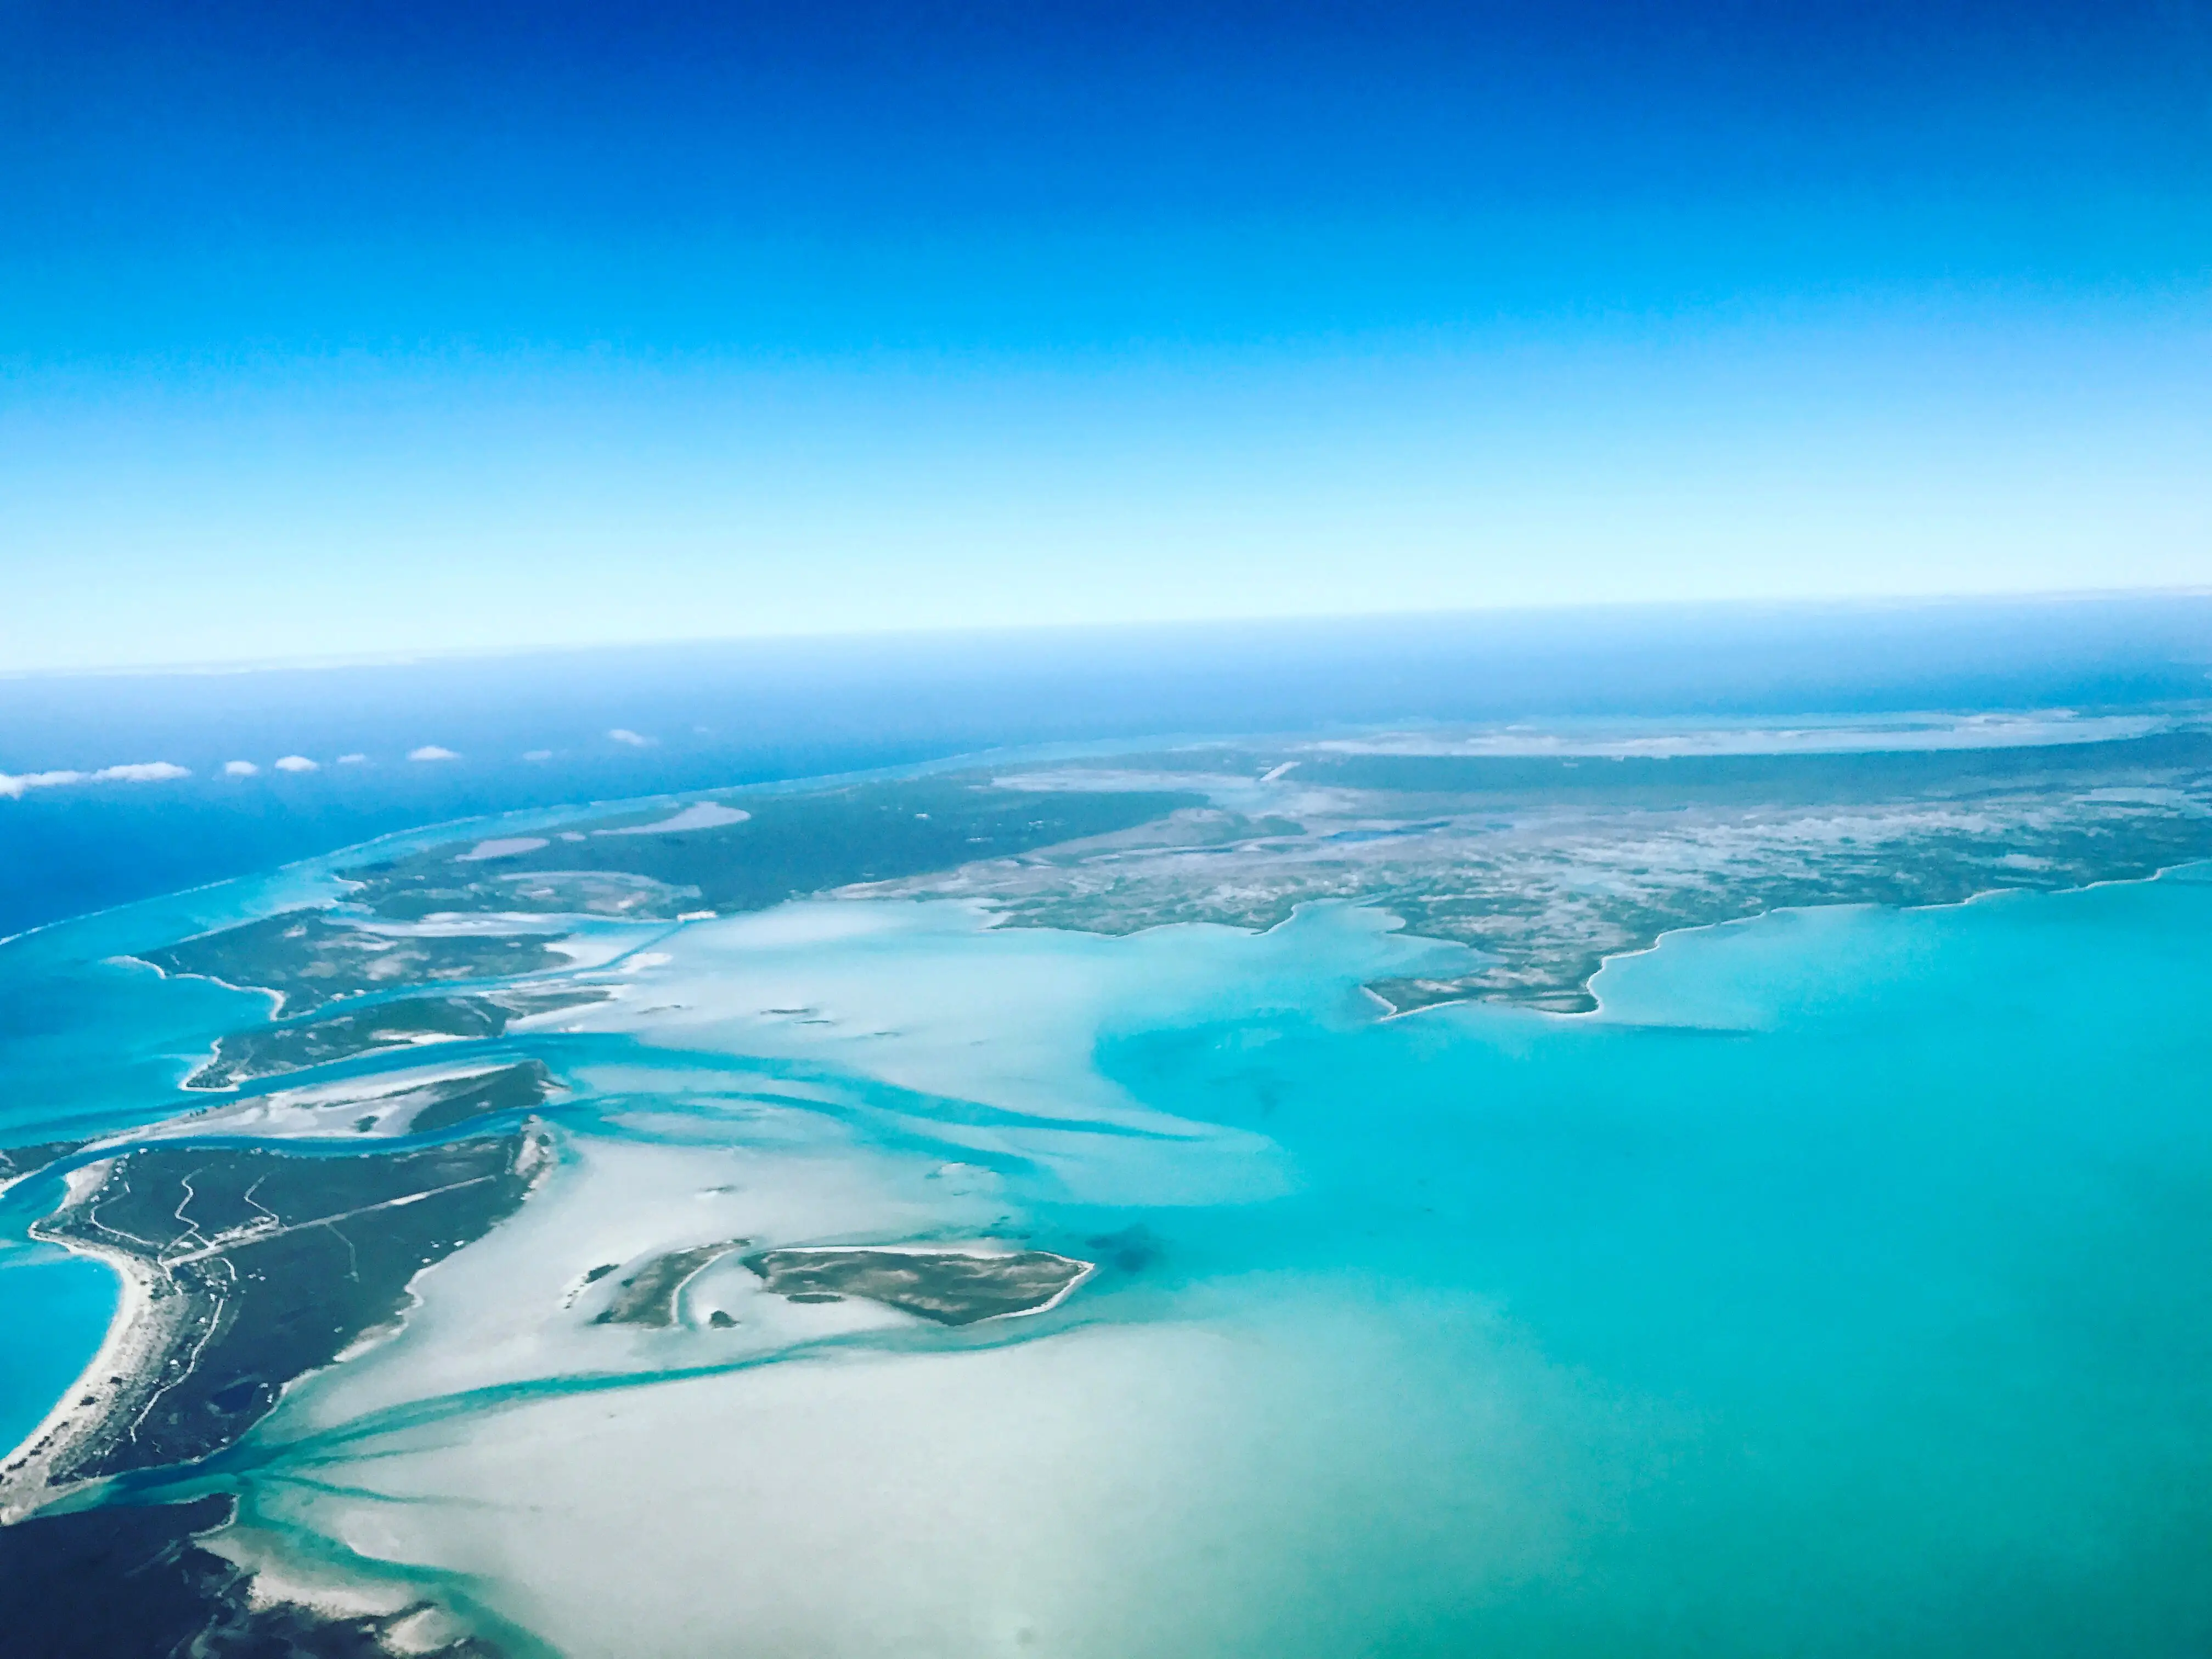 Entry Requirements to Turks and Caicos (Customs And Immigration Information)